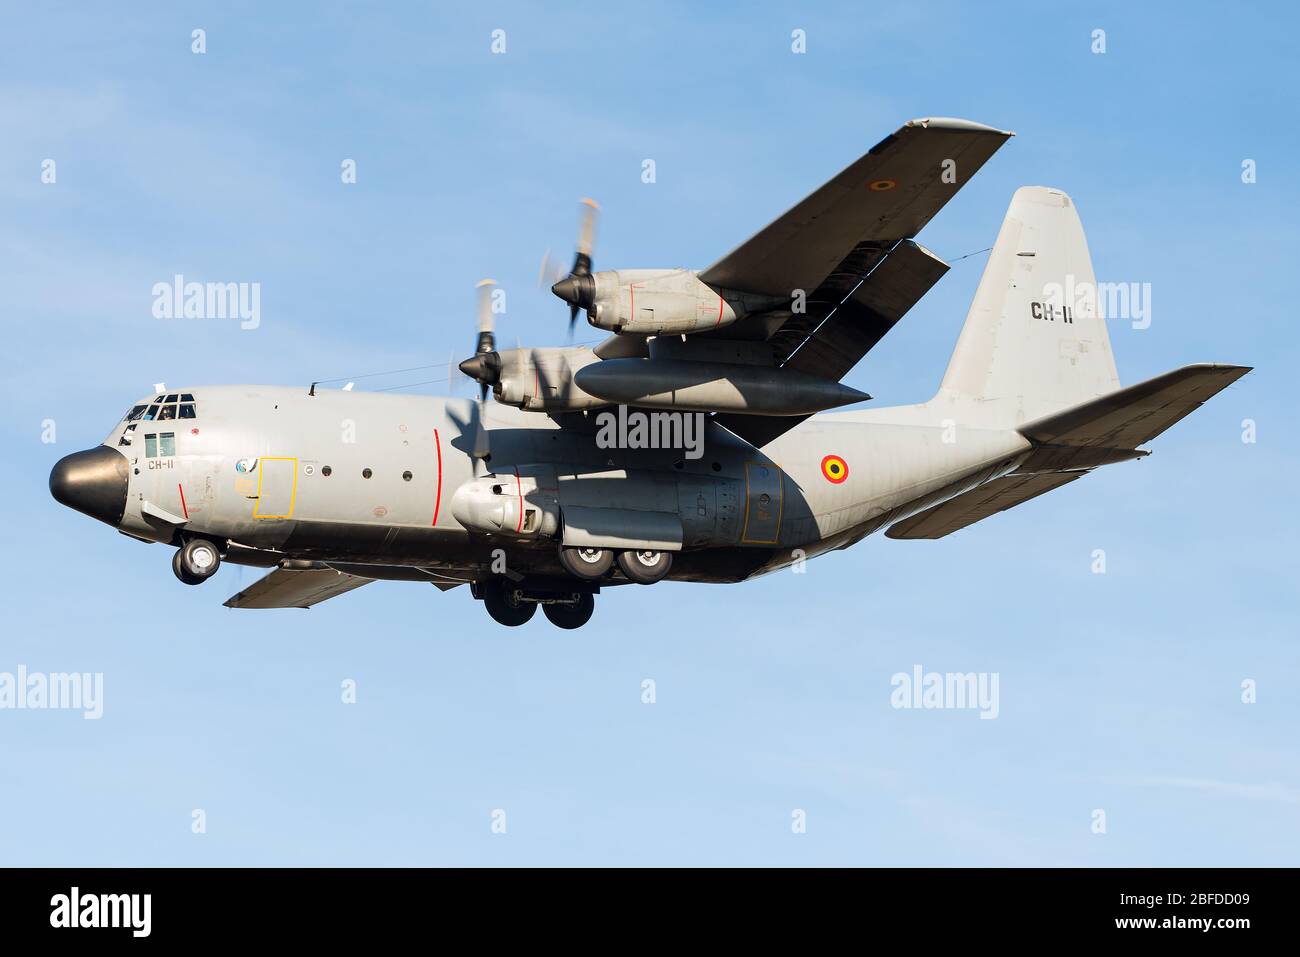 A Lockheed C-130 Hercules four-engine turboprop military transport aircraft of the Belgian Air Force. Stock Photo